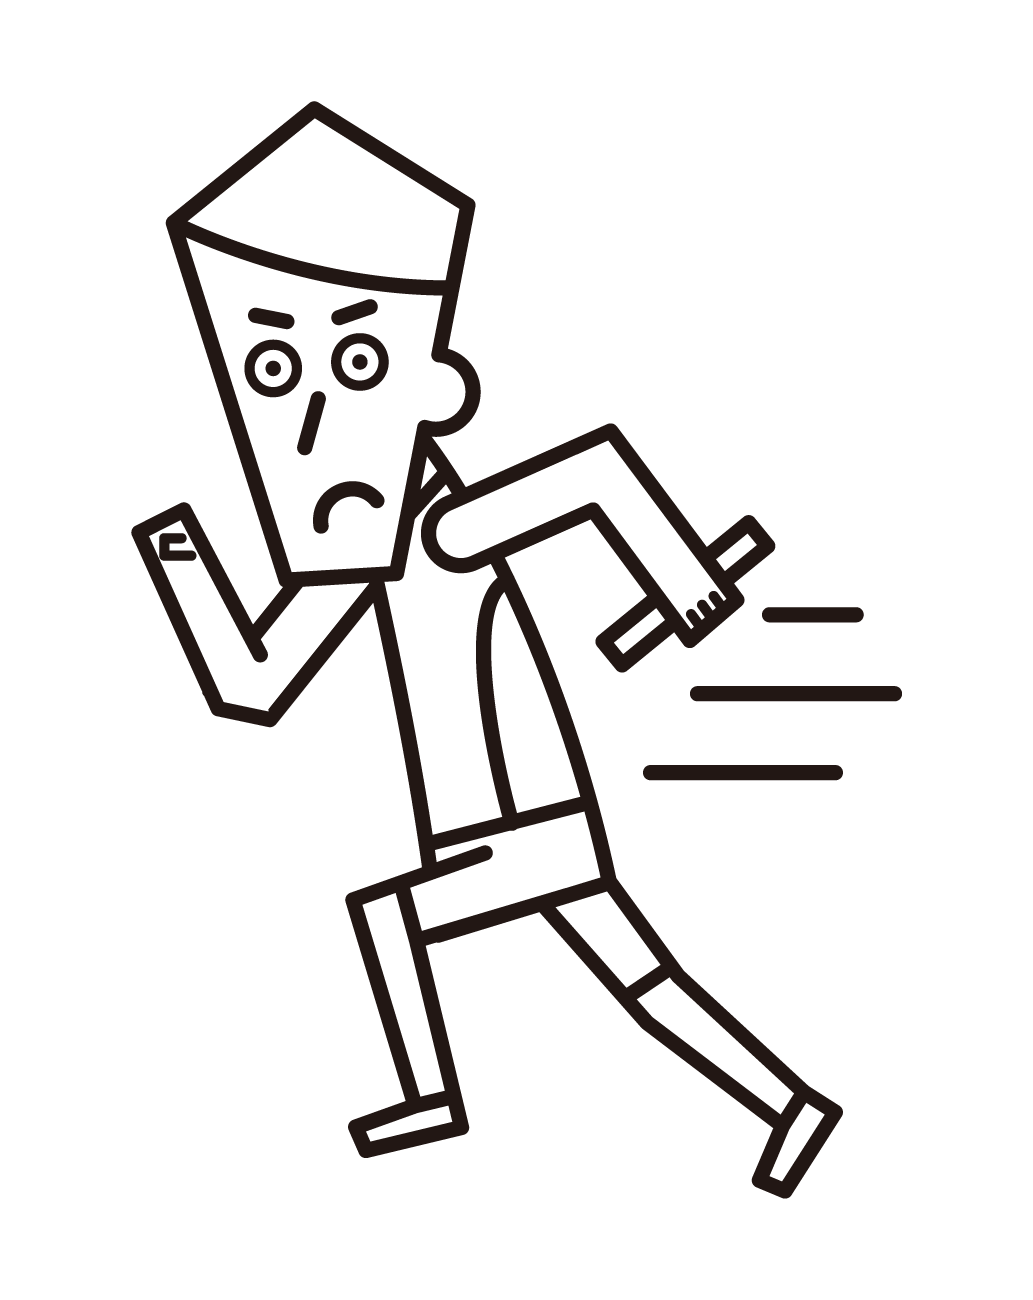 Illustration of a relay runner (male)